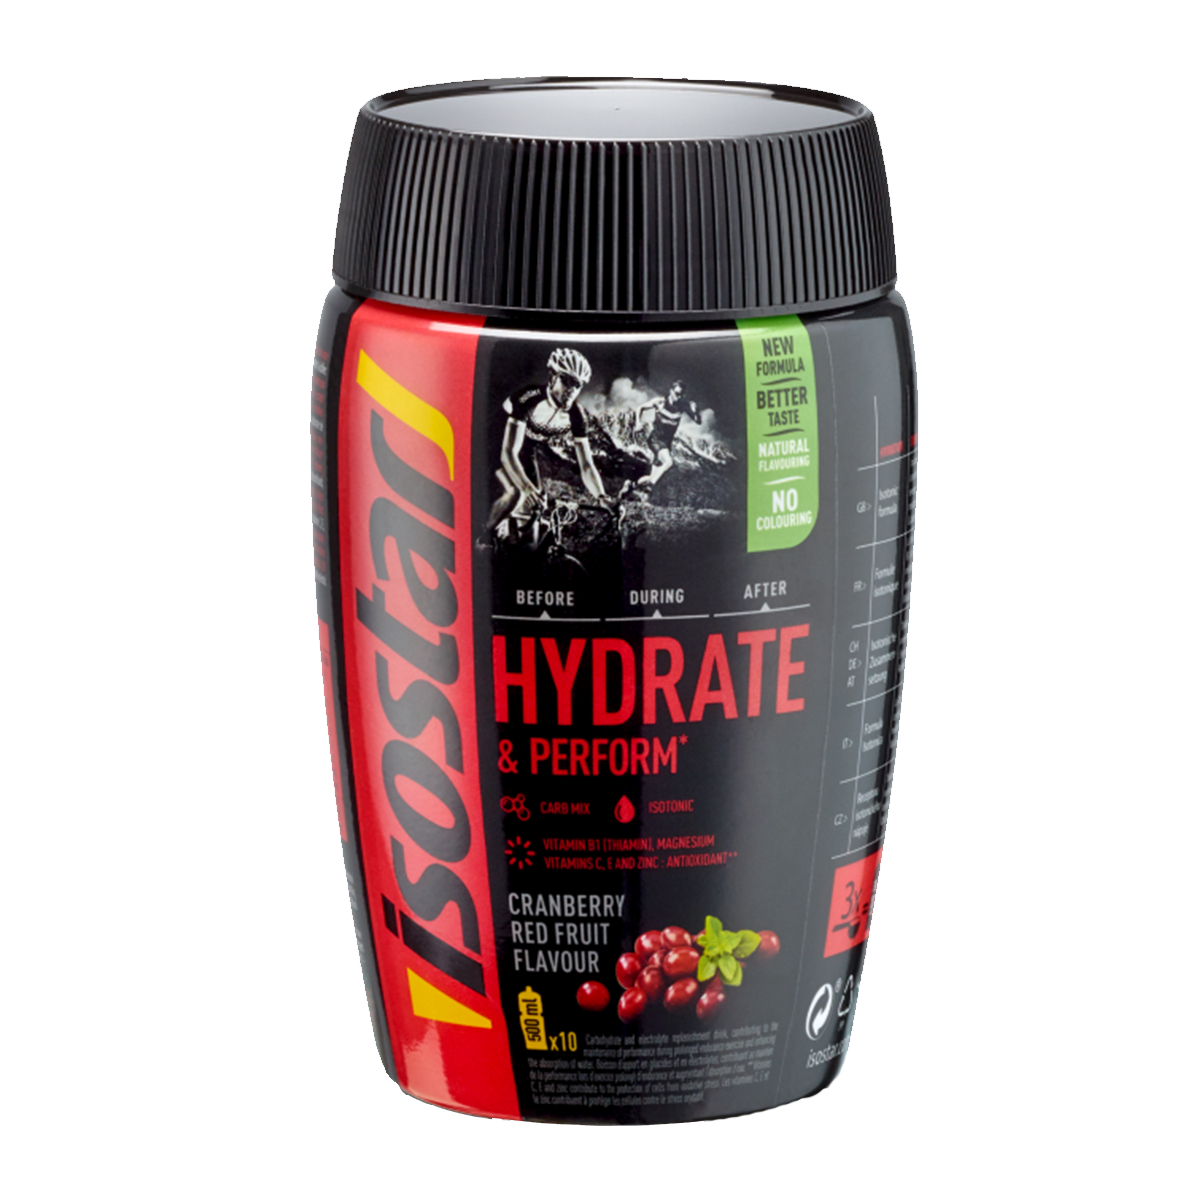  Isostar Hydrate & Perform Red Fruits - boisson isotonique